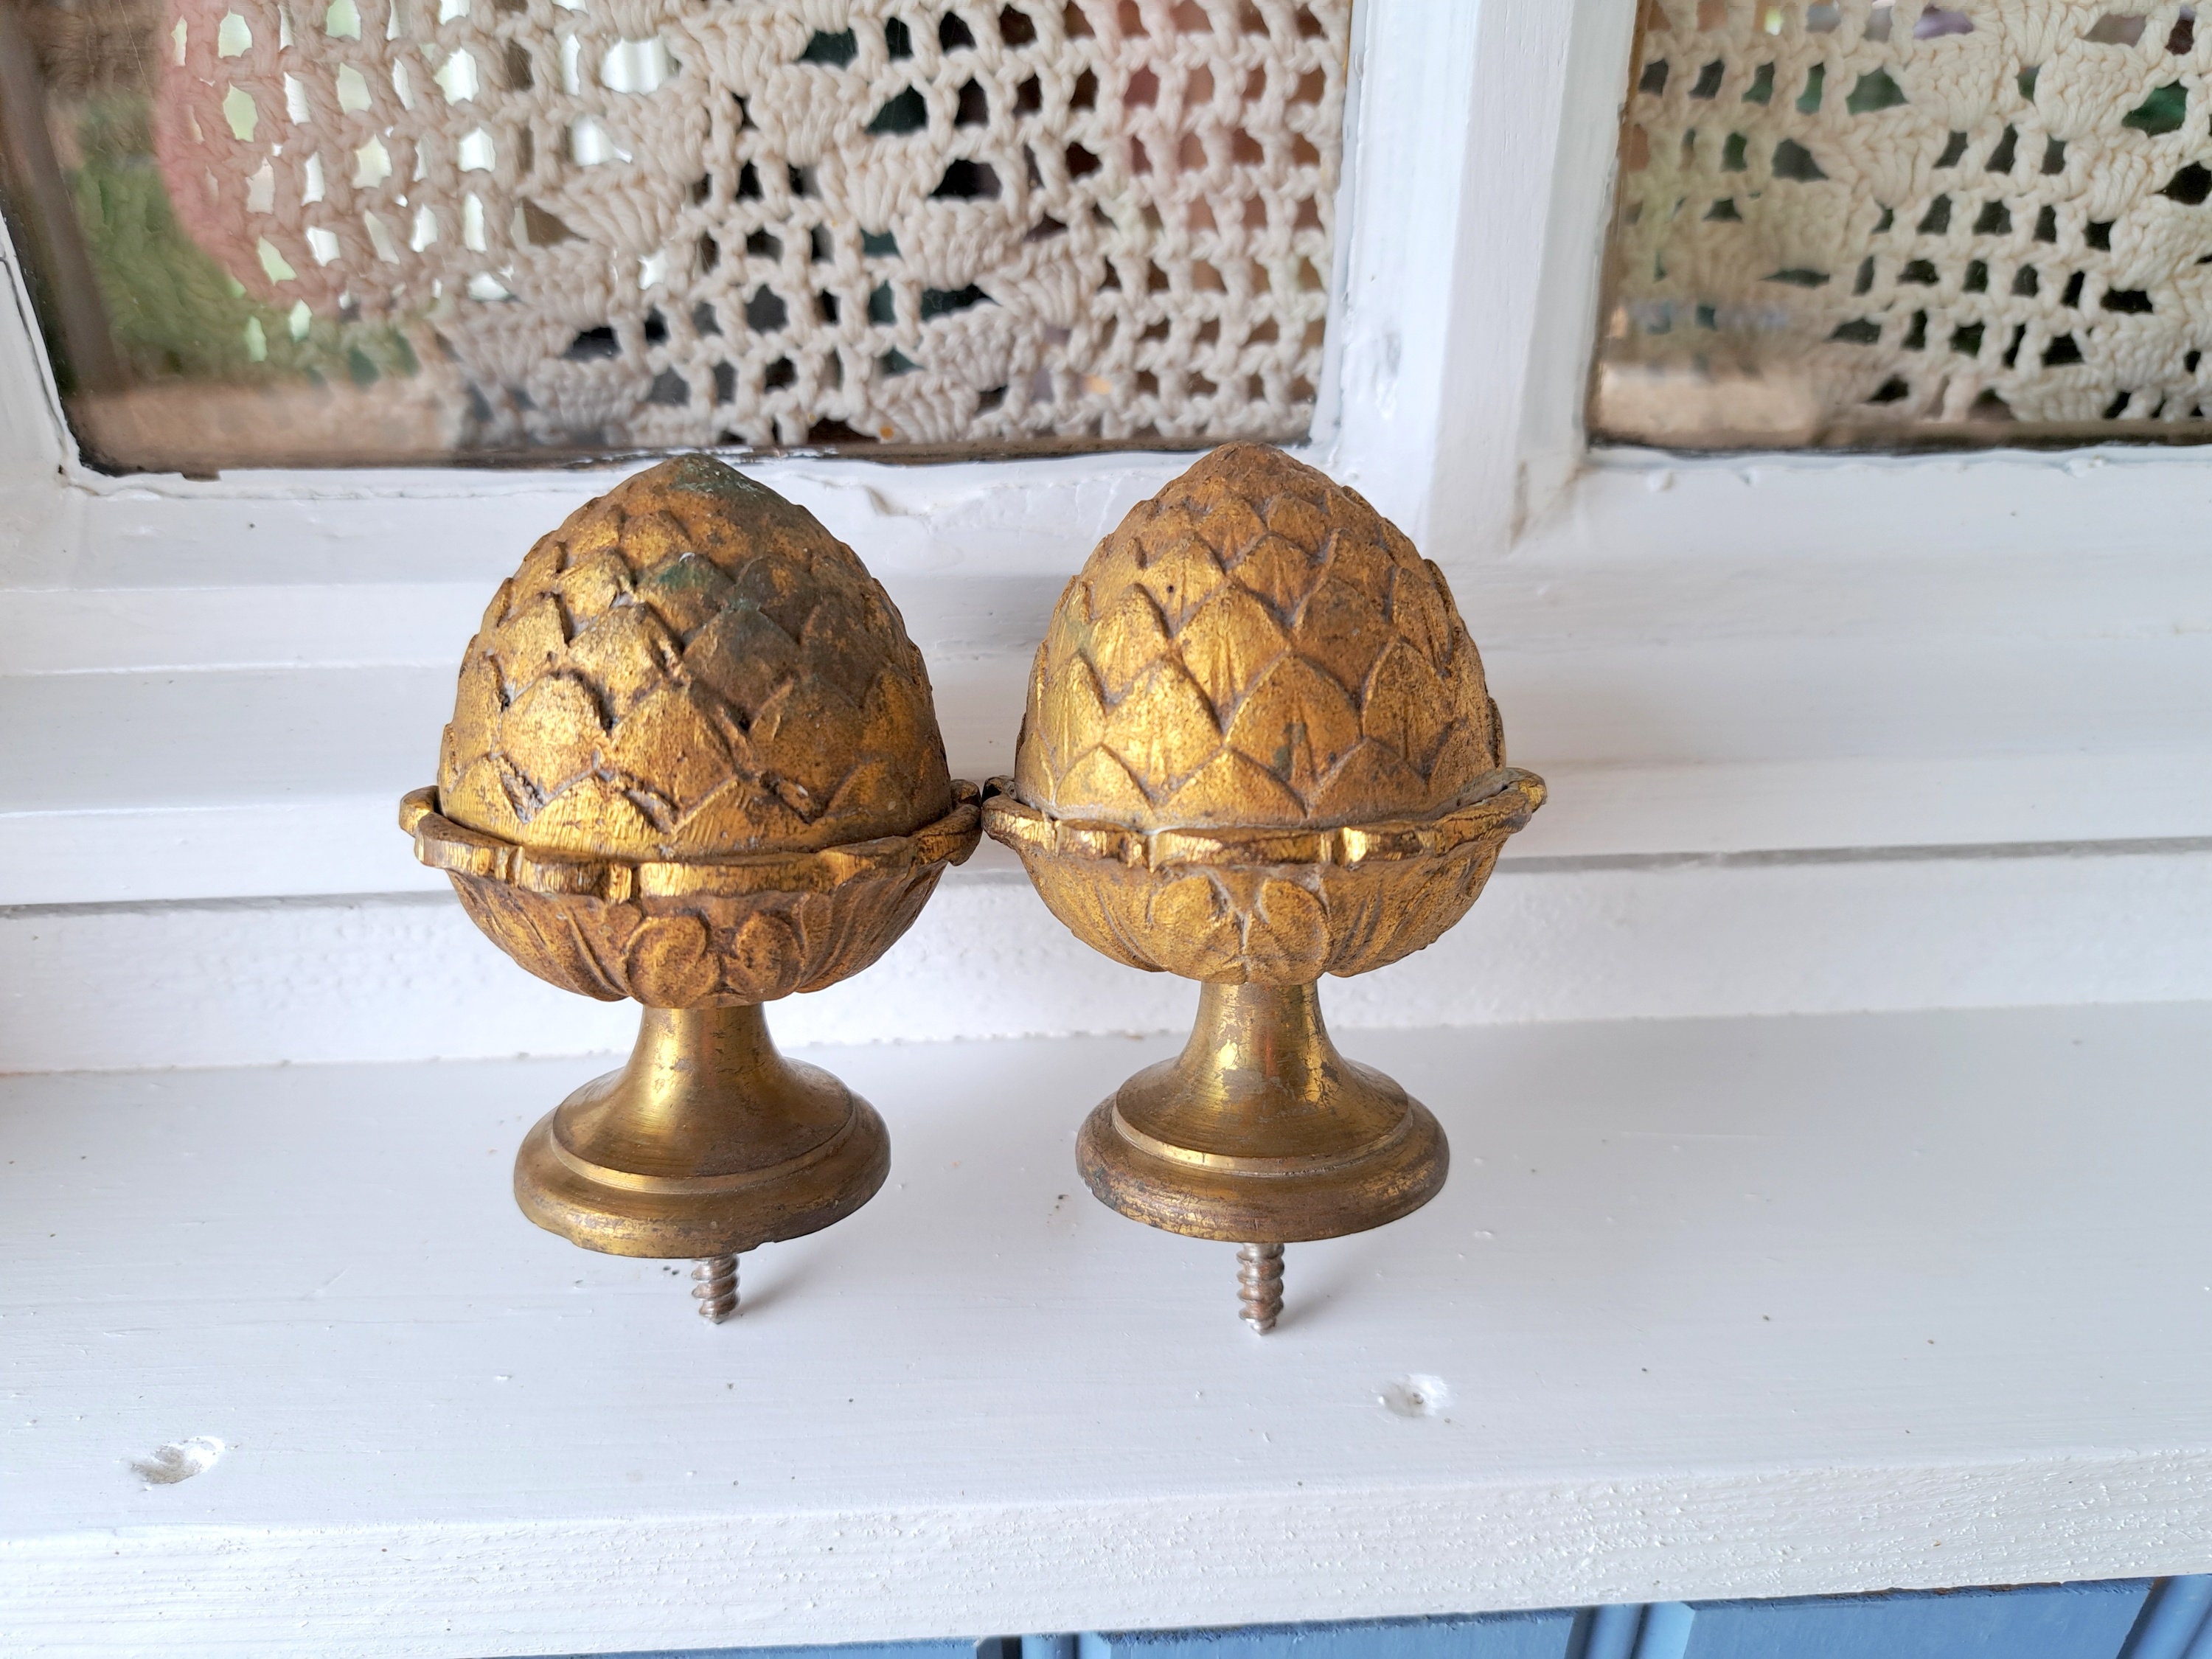 7 inch Full Pineapple Finial | Pine | Wooden Finials & Buttons